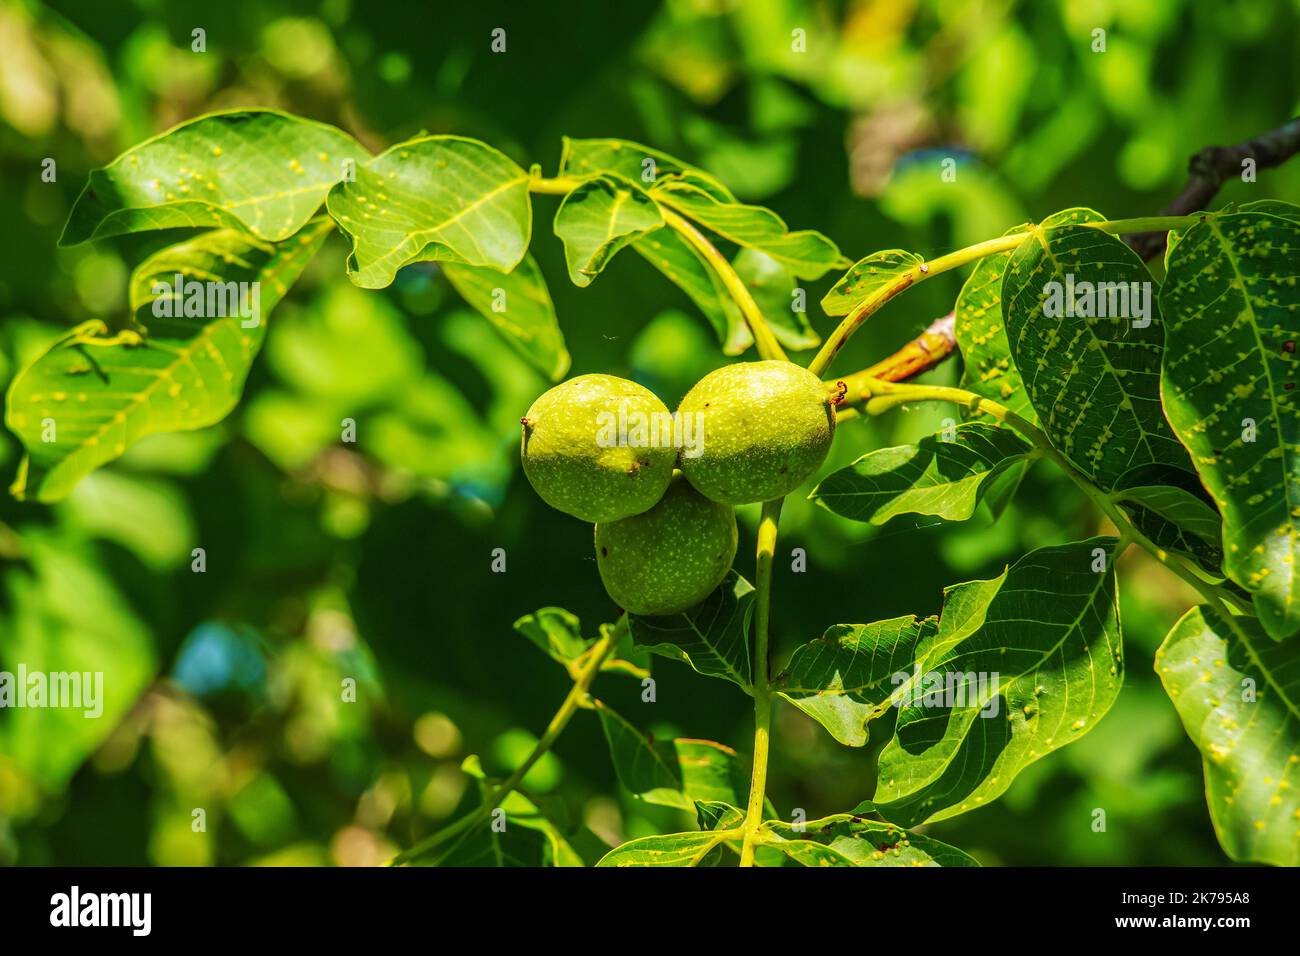 Close up on green walnuts growing on a tree. Selective focus. Stock Photo